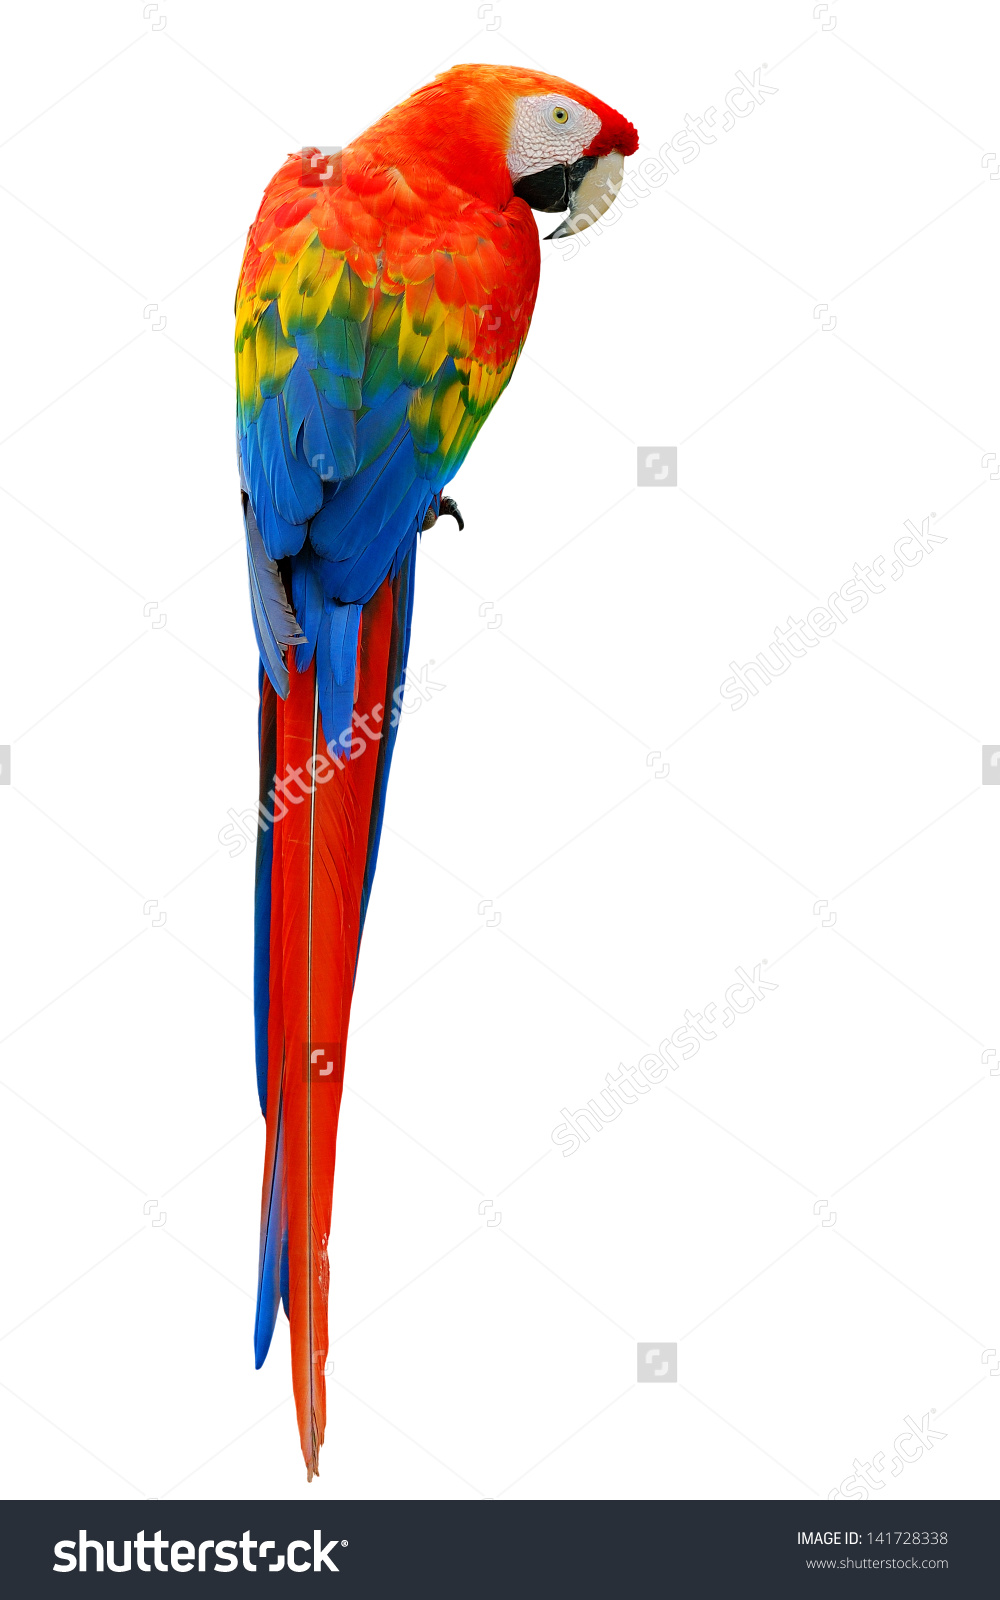 Scarlet Macaw clipart #2, Download drawings